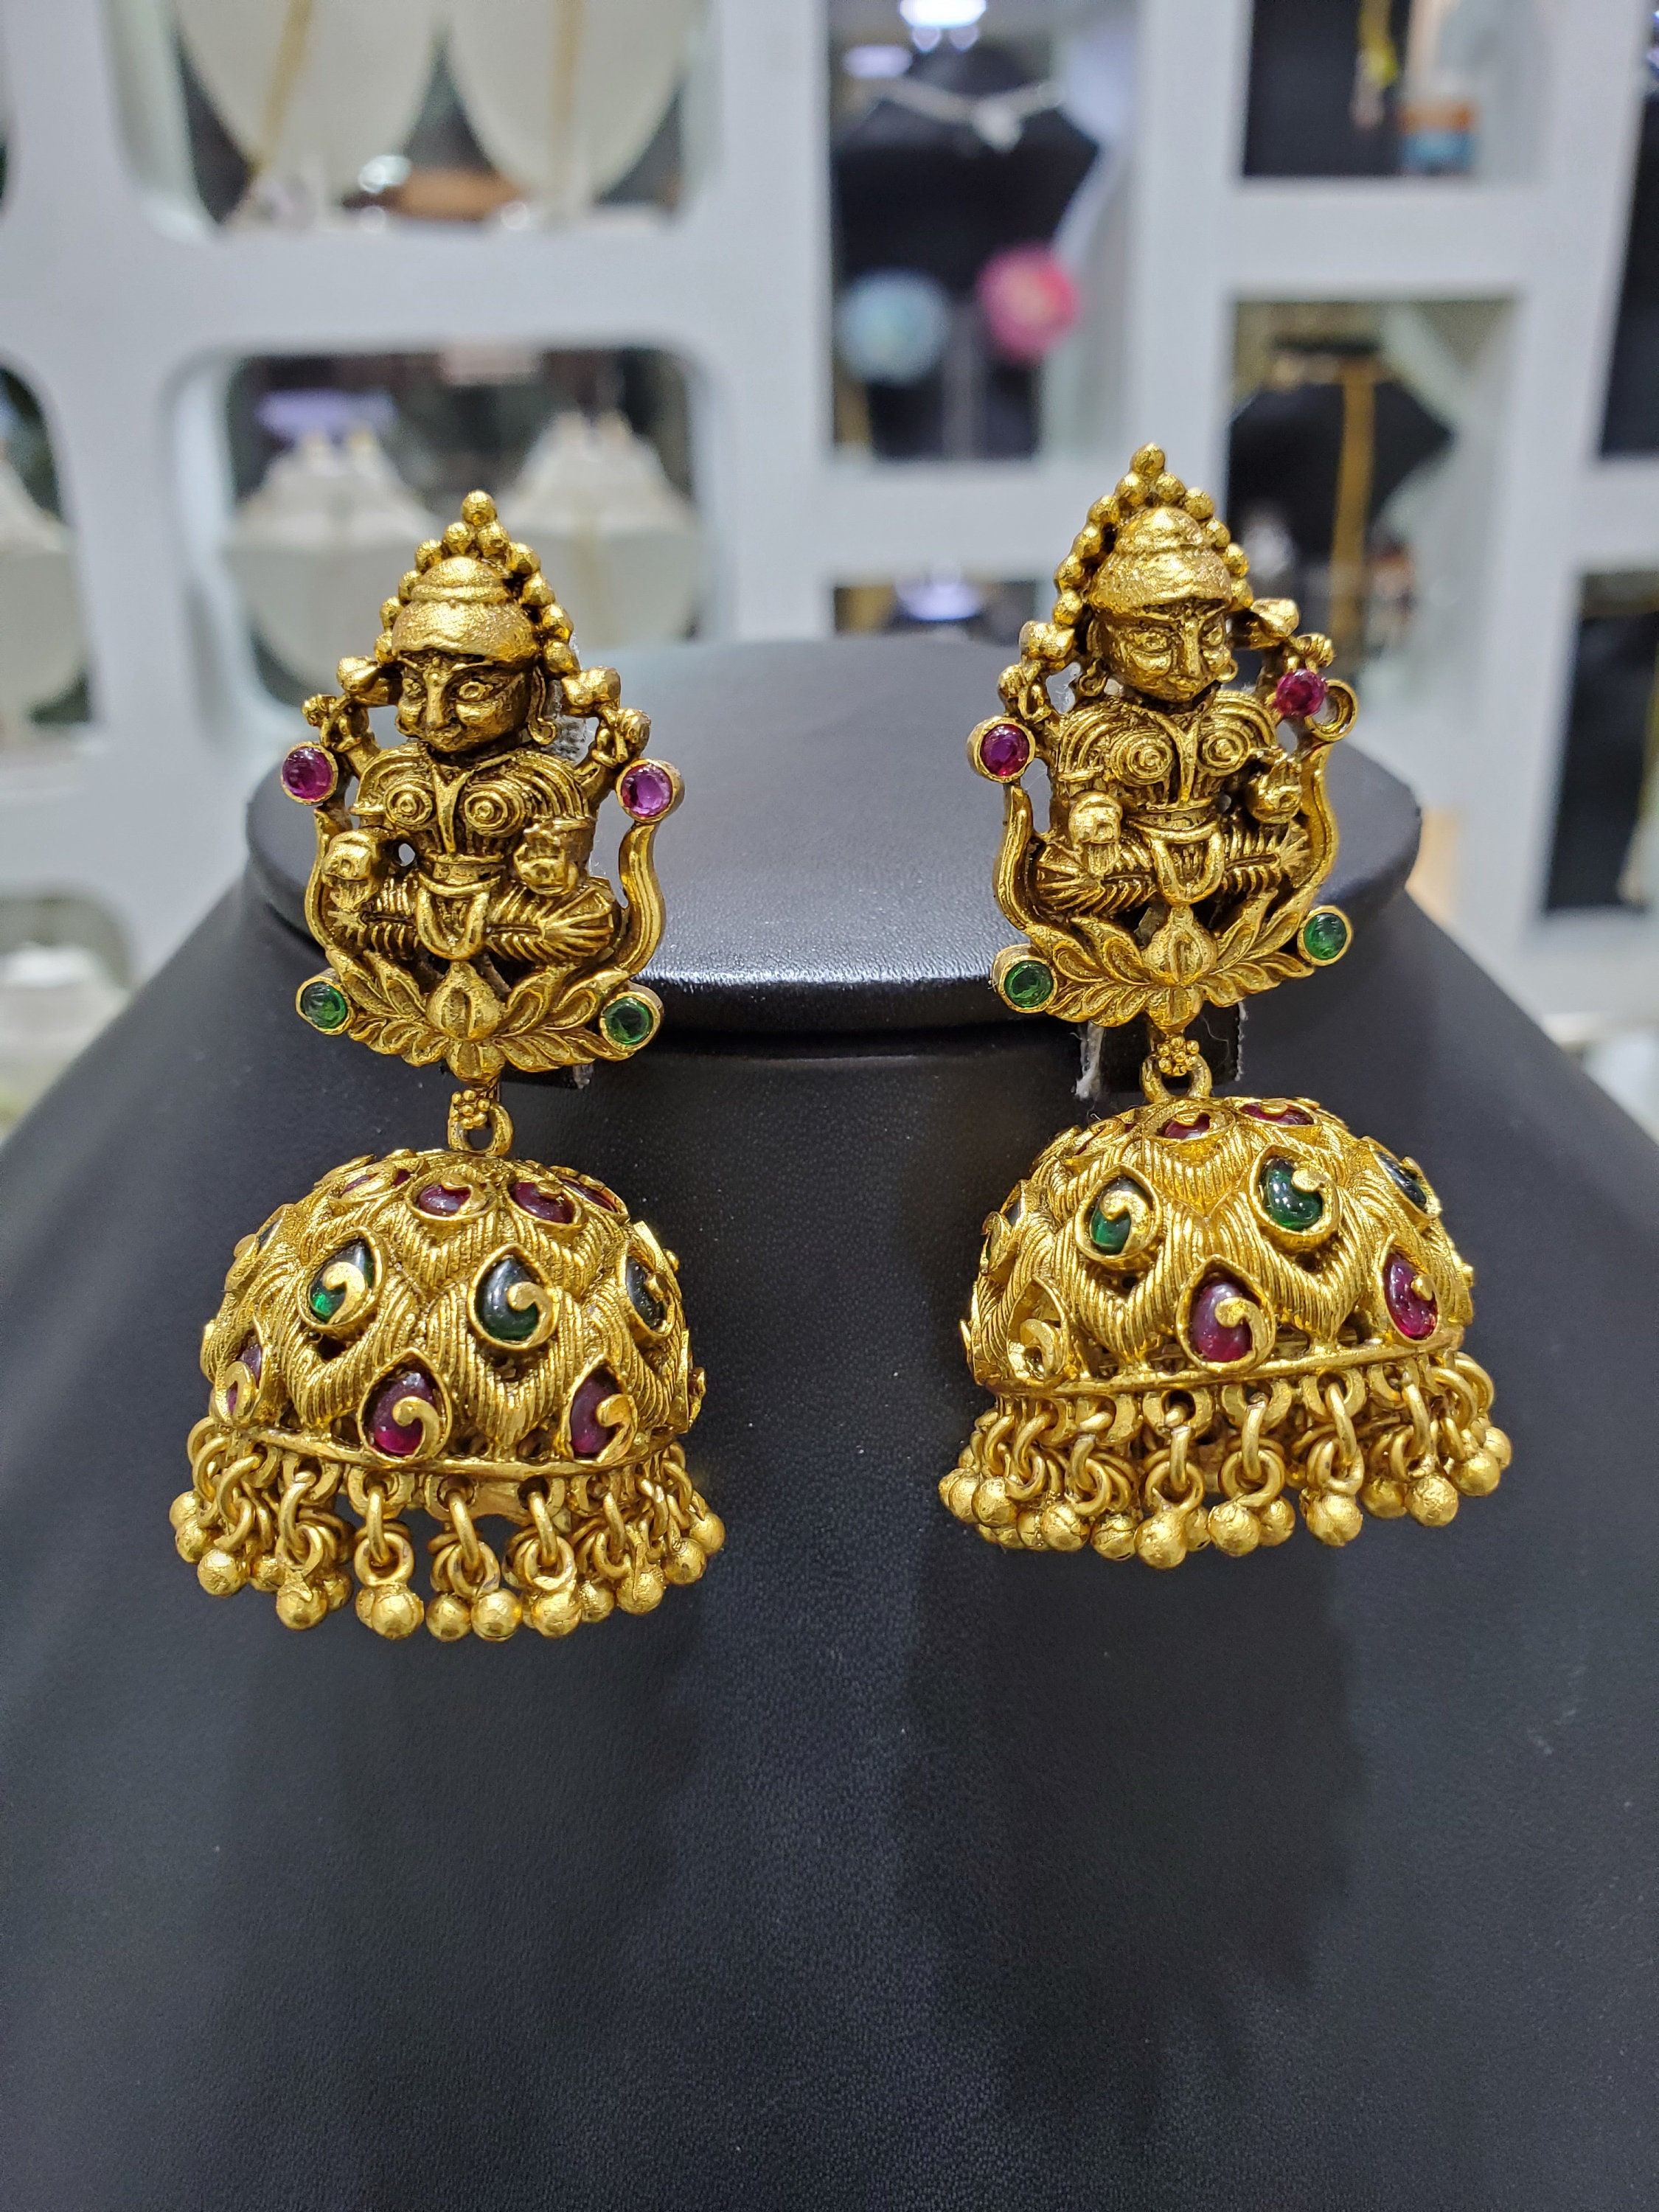 Temple Jewellery - 22K Gold Drop Earrings with Beads - 235-GER15937 in  5.250 Grams